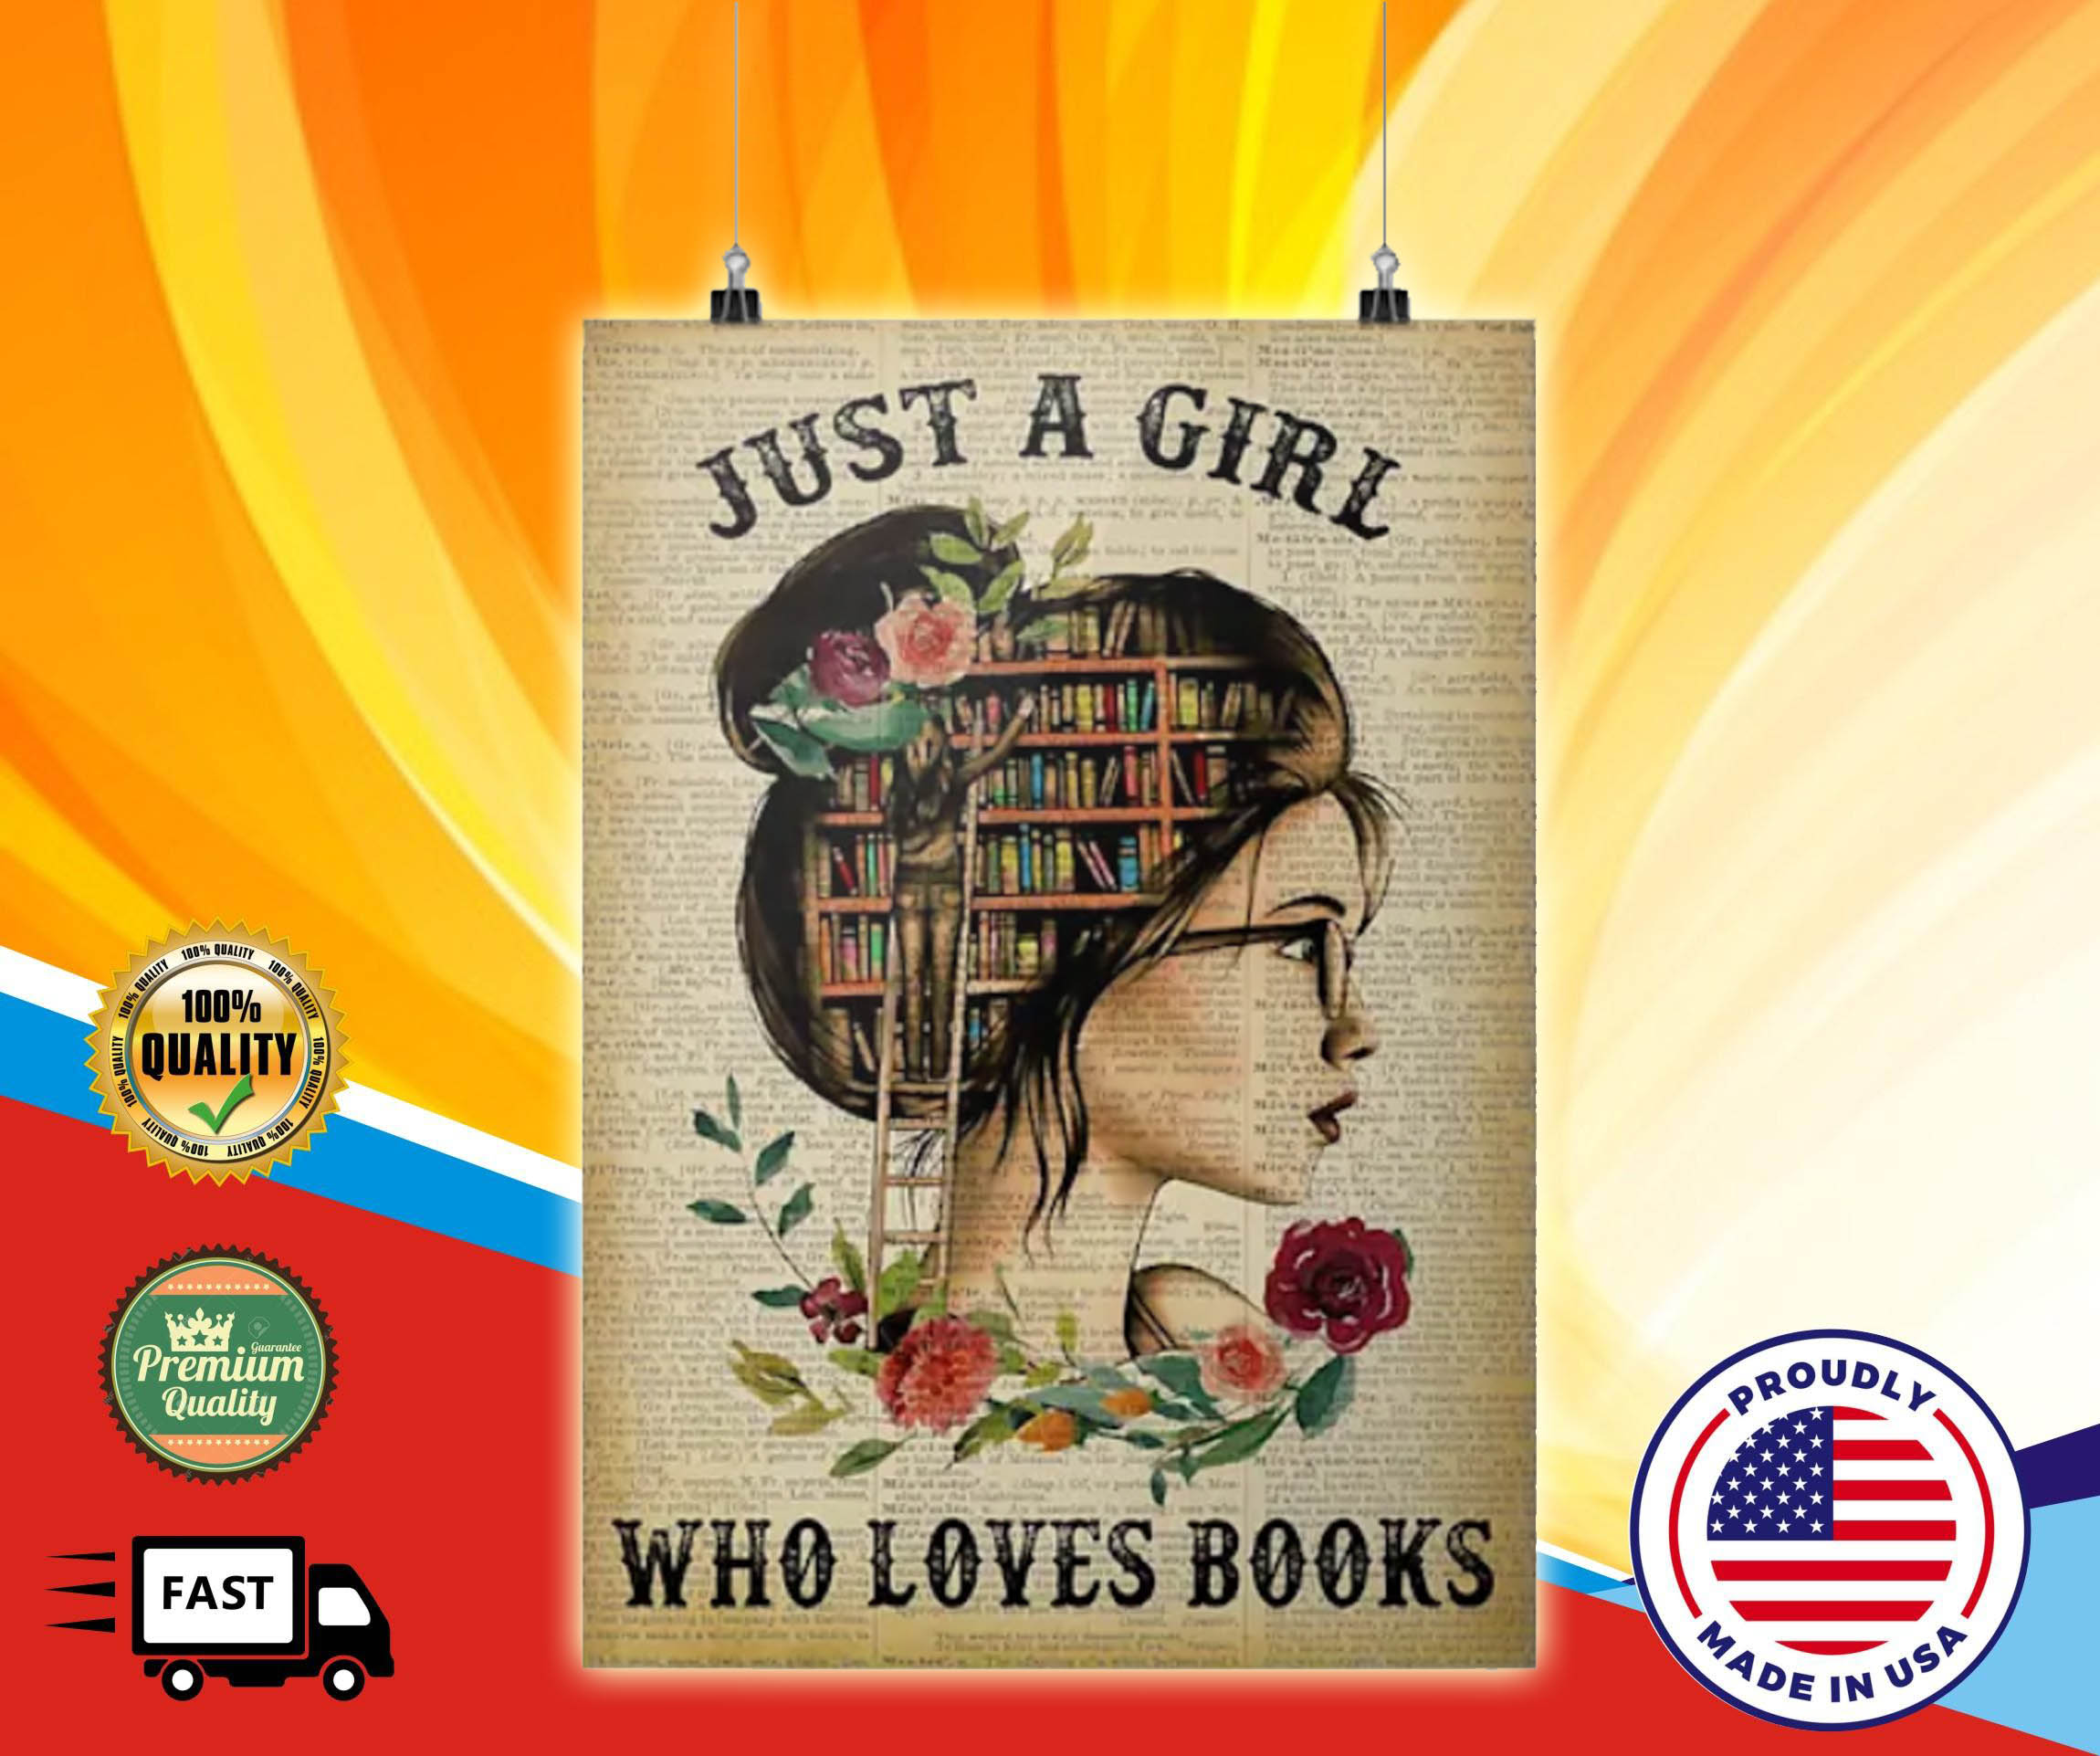 Just a girl who loves books hot poster